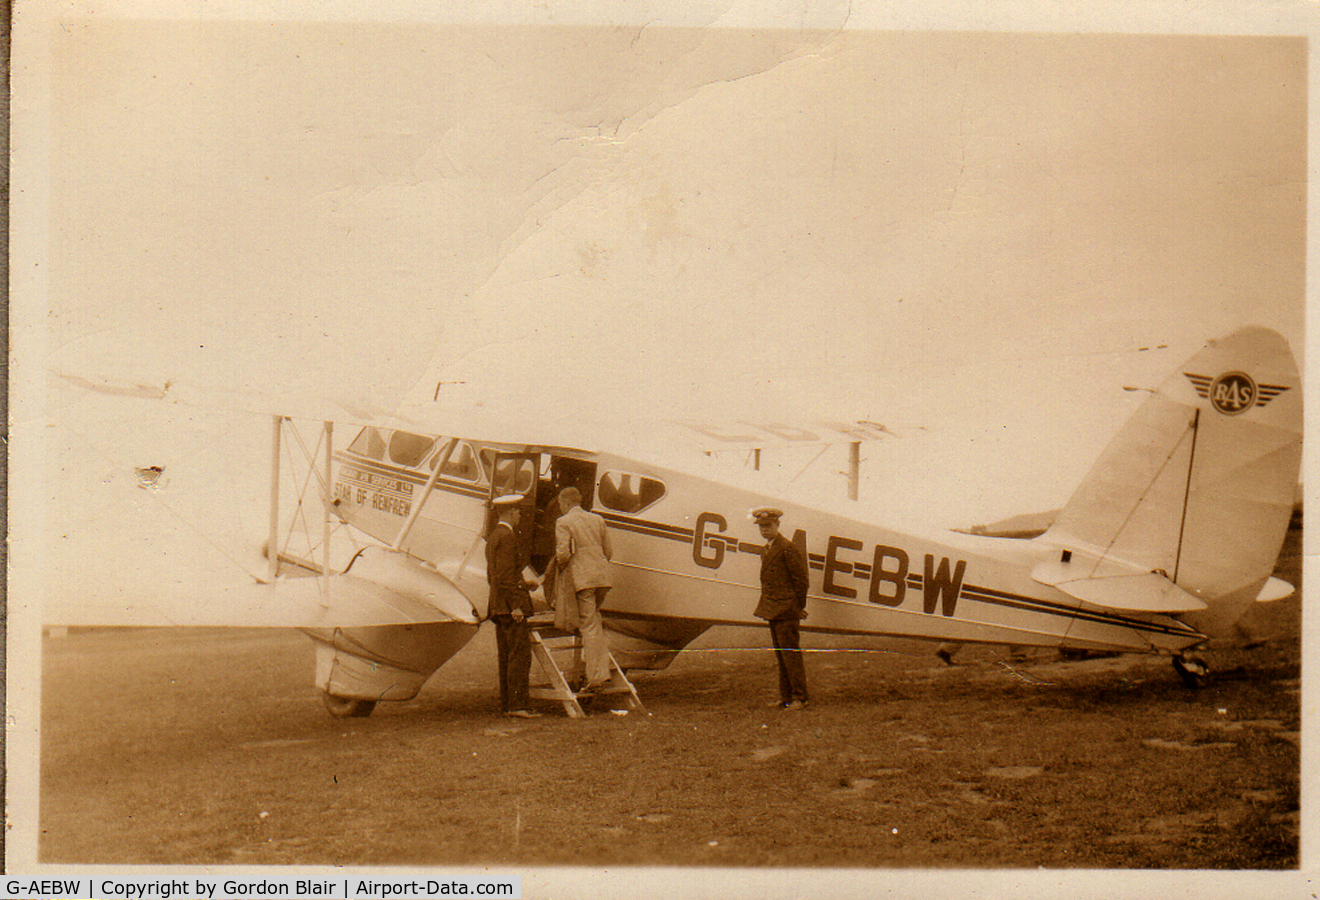 G-AEBW, 1936 De Havilland DH-89A Dragon Rapide C/N 6327, Photographed at Ronaldsway on the Isle of Man in 1936. Believed to be operating a service to Blackpool. From the family album.